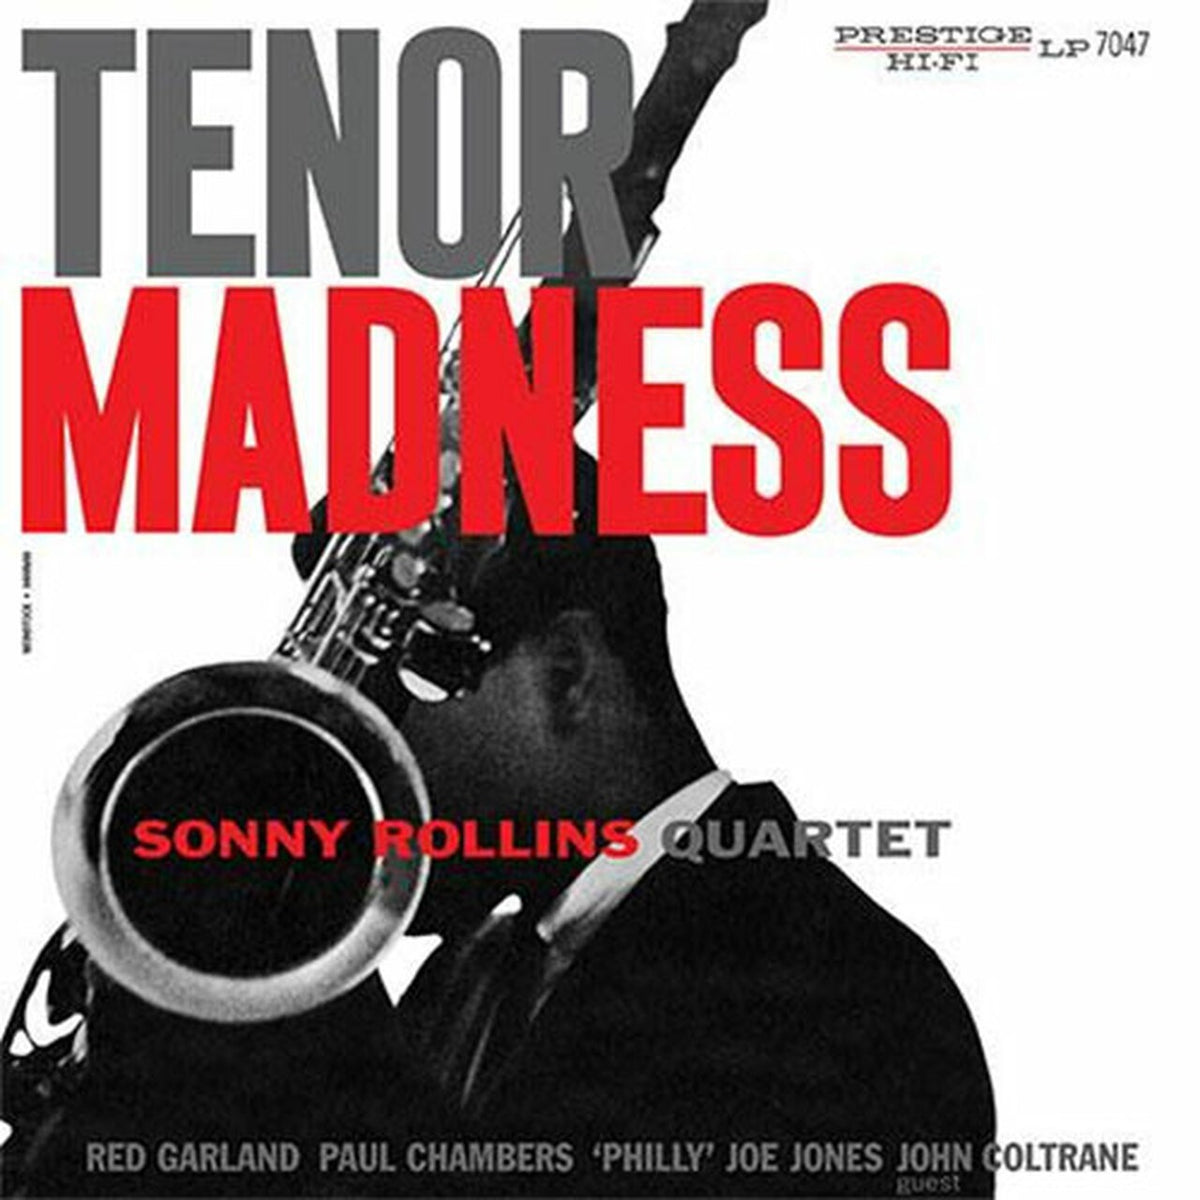 Sonny Rollins Quartet &. Quintet - Tenor Madness LP (Analogue Productions Prestige Mono, 180g, Remastered by Kevin Gray)